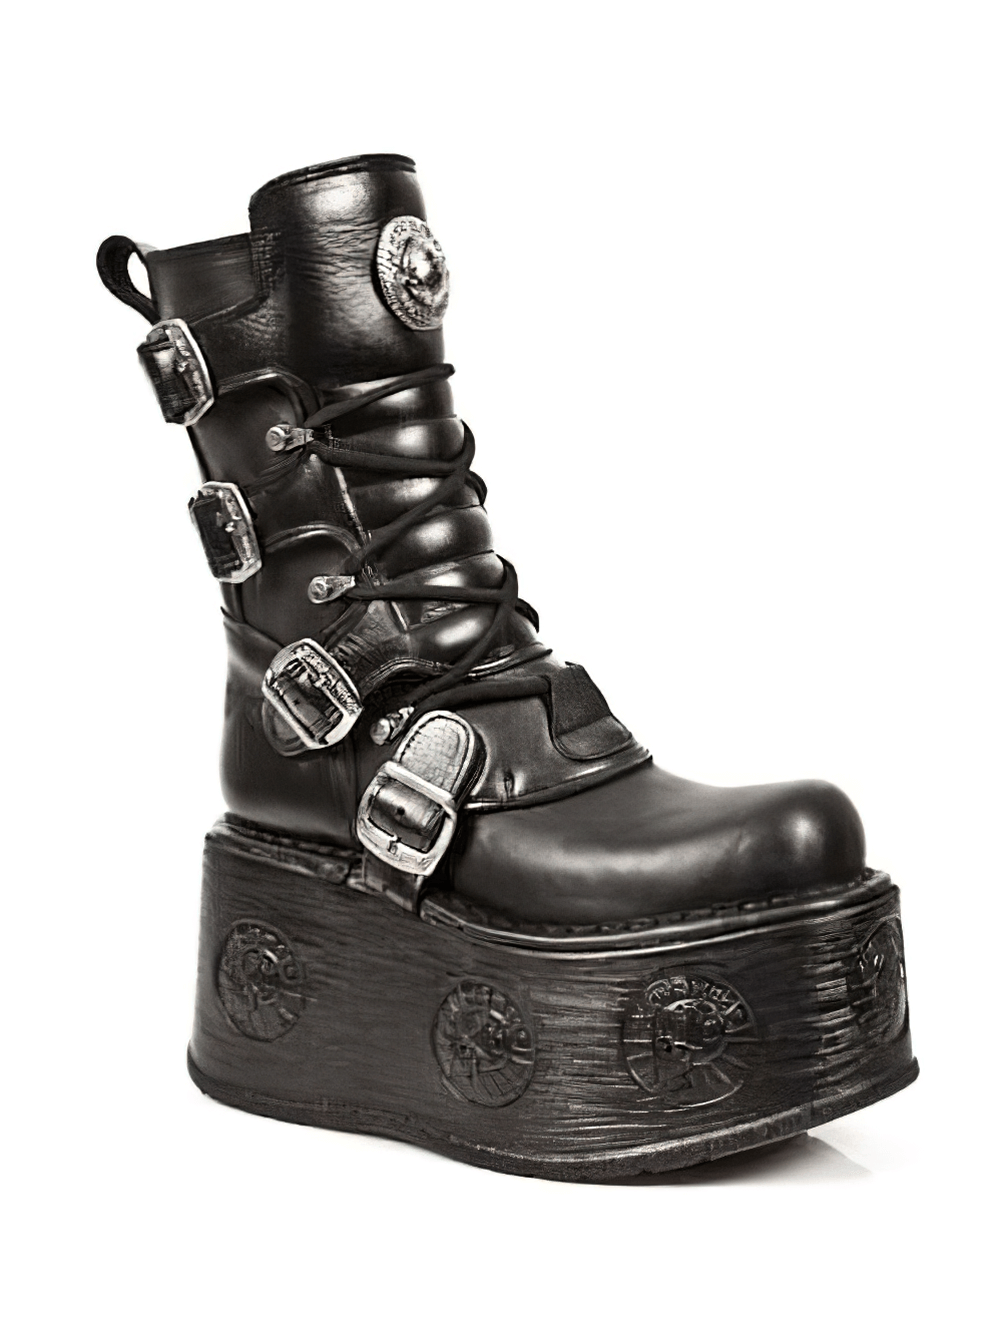 NEW ROCK Gothic High Platform Boots with Metal Accents